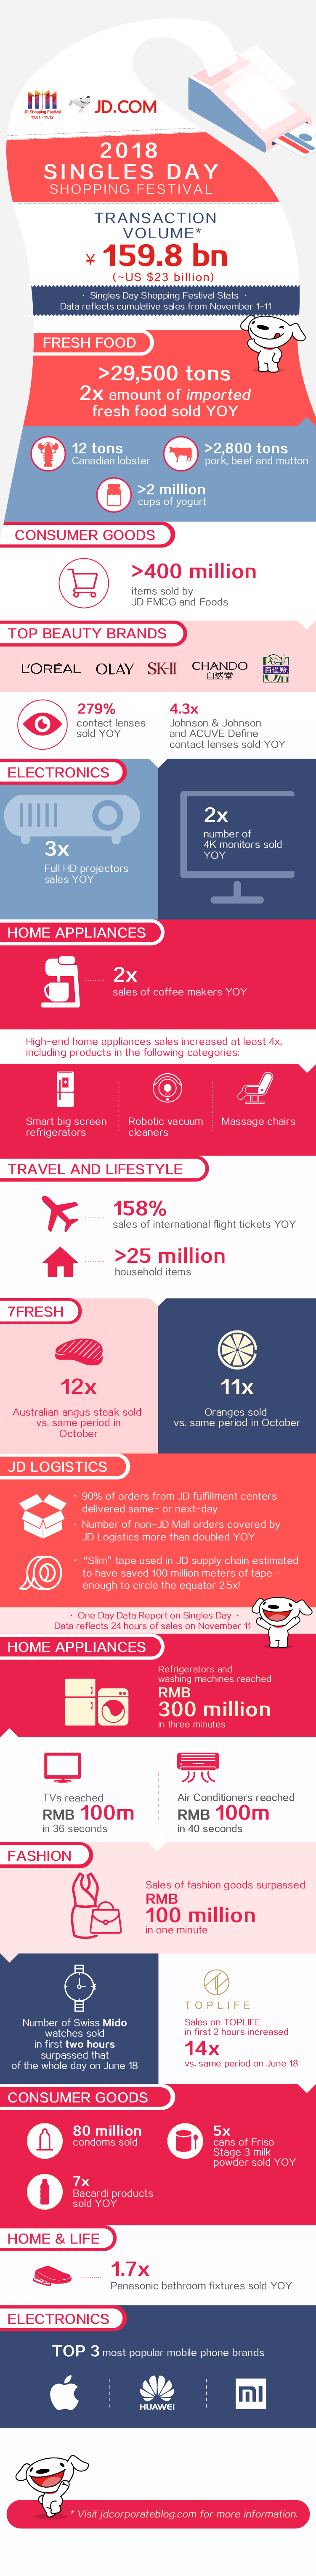 JD.com’s Singles Day Shopping Festival this year, see the infographic